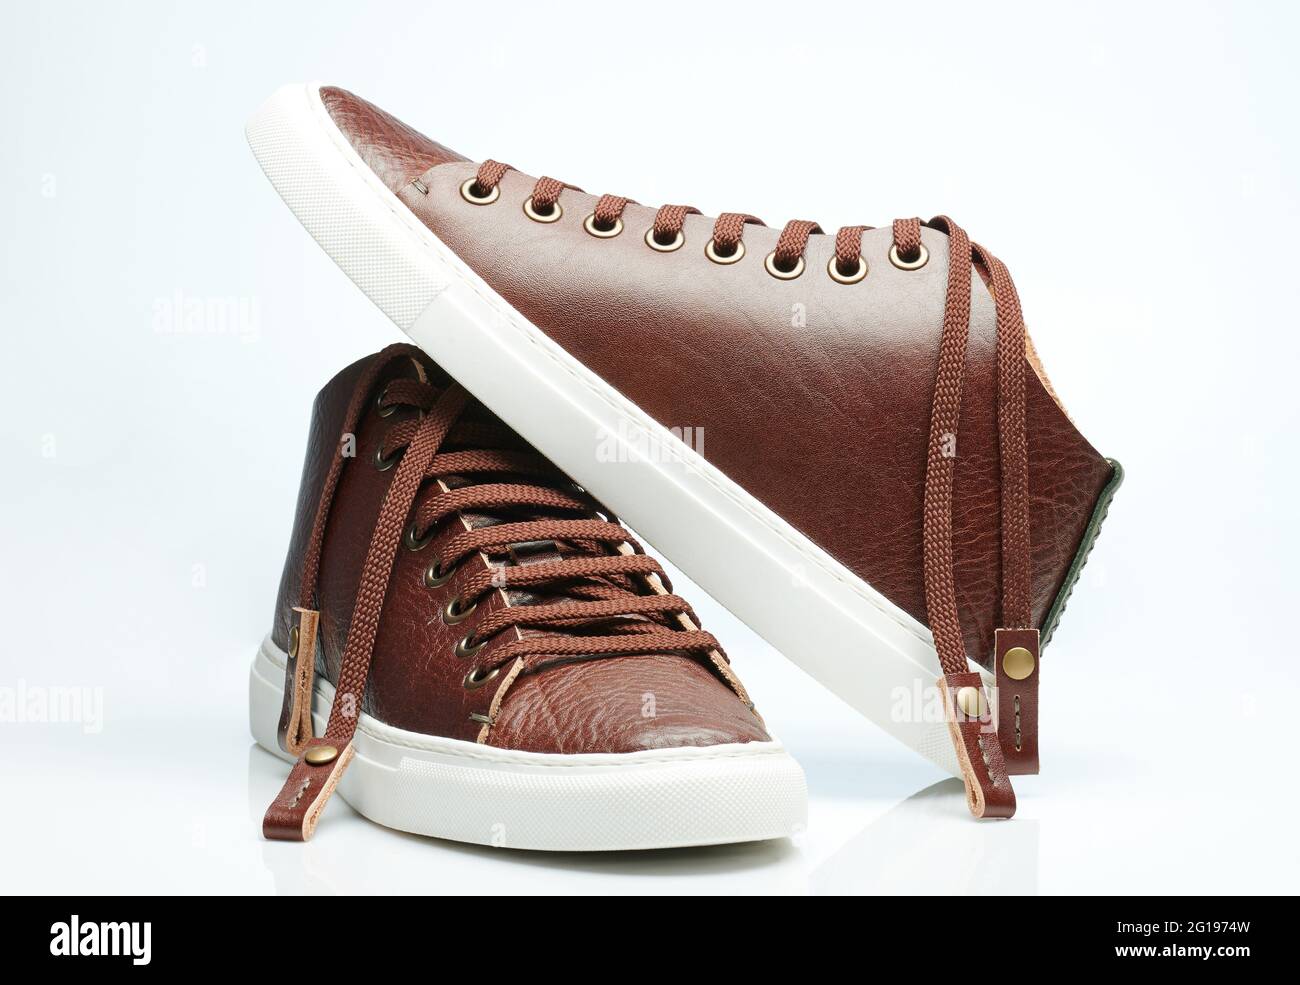 Pair of brown leather sneakers with white sole isolated Stock Photo